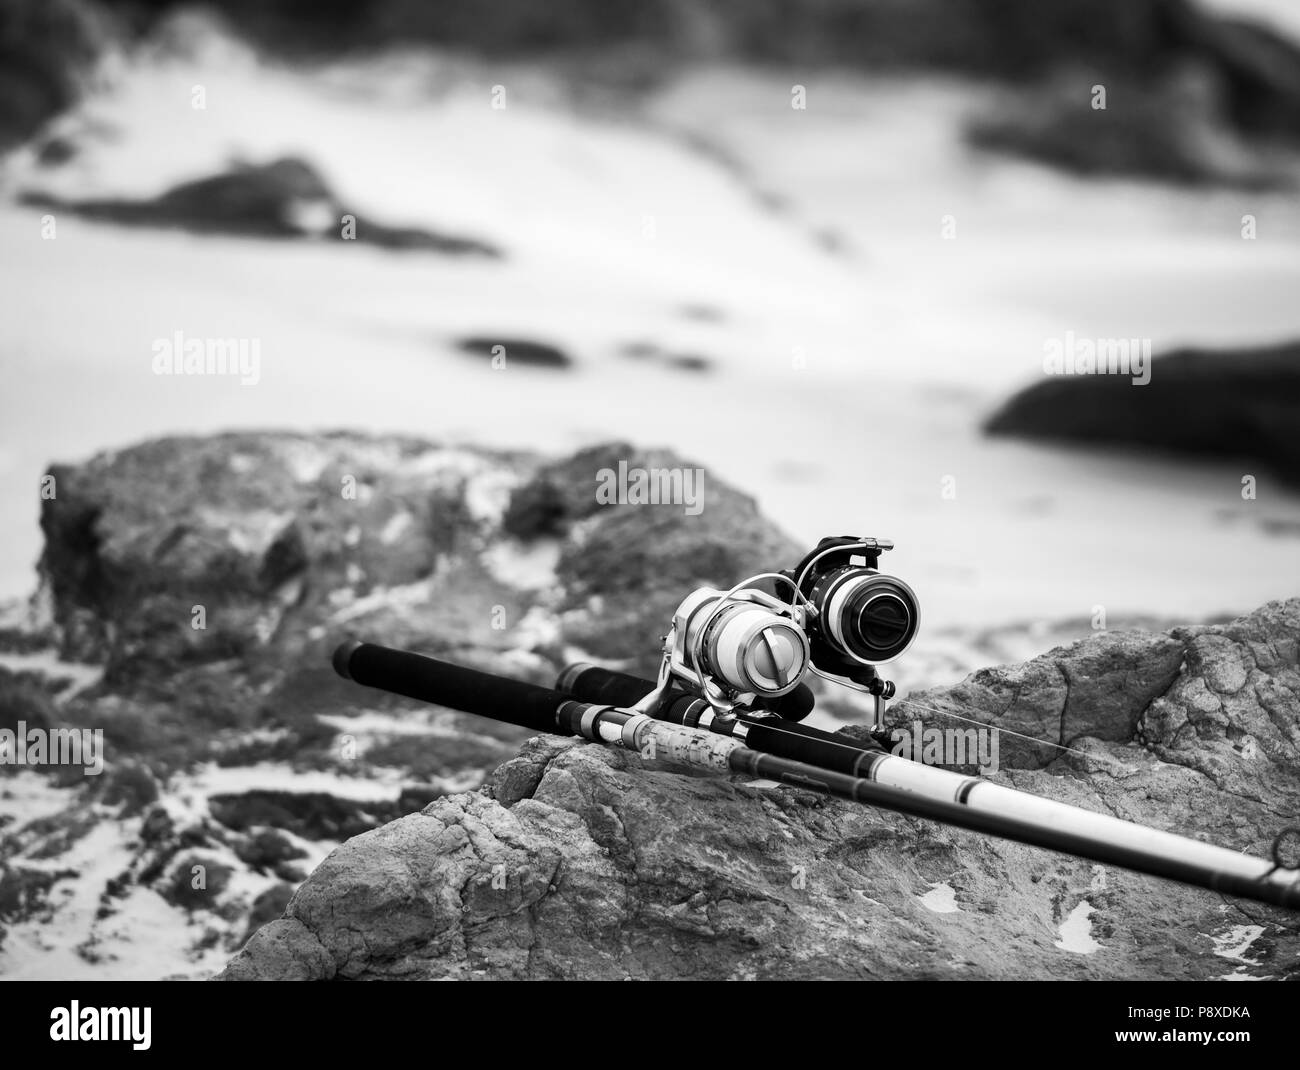 Natural fishing rod Black and White Stock Photos & Images - Alamy